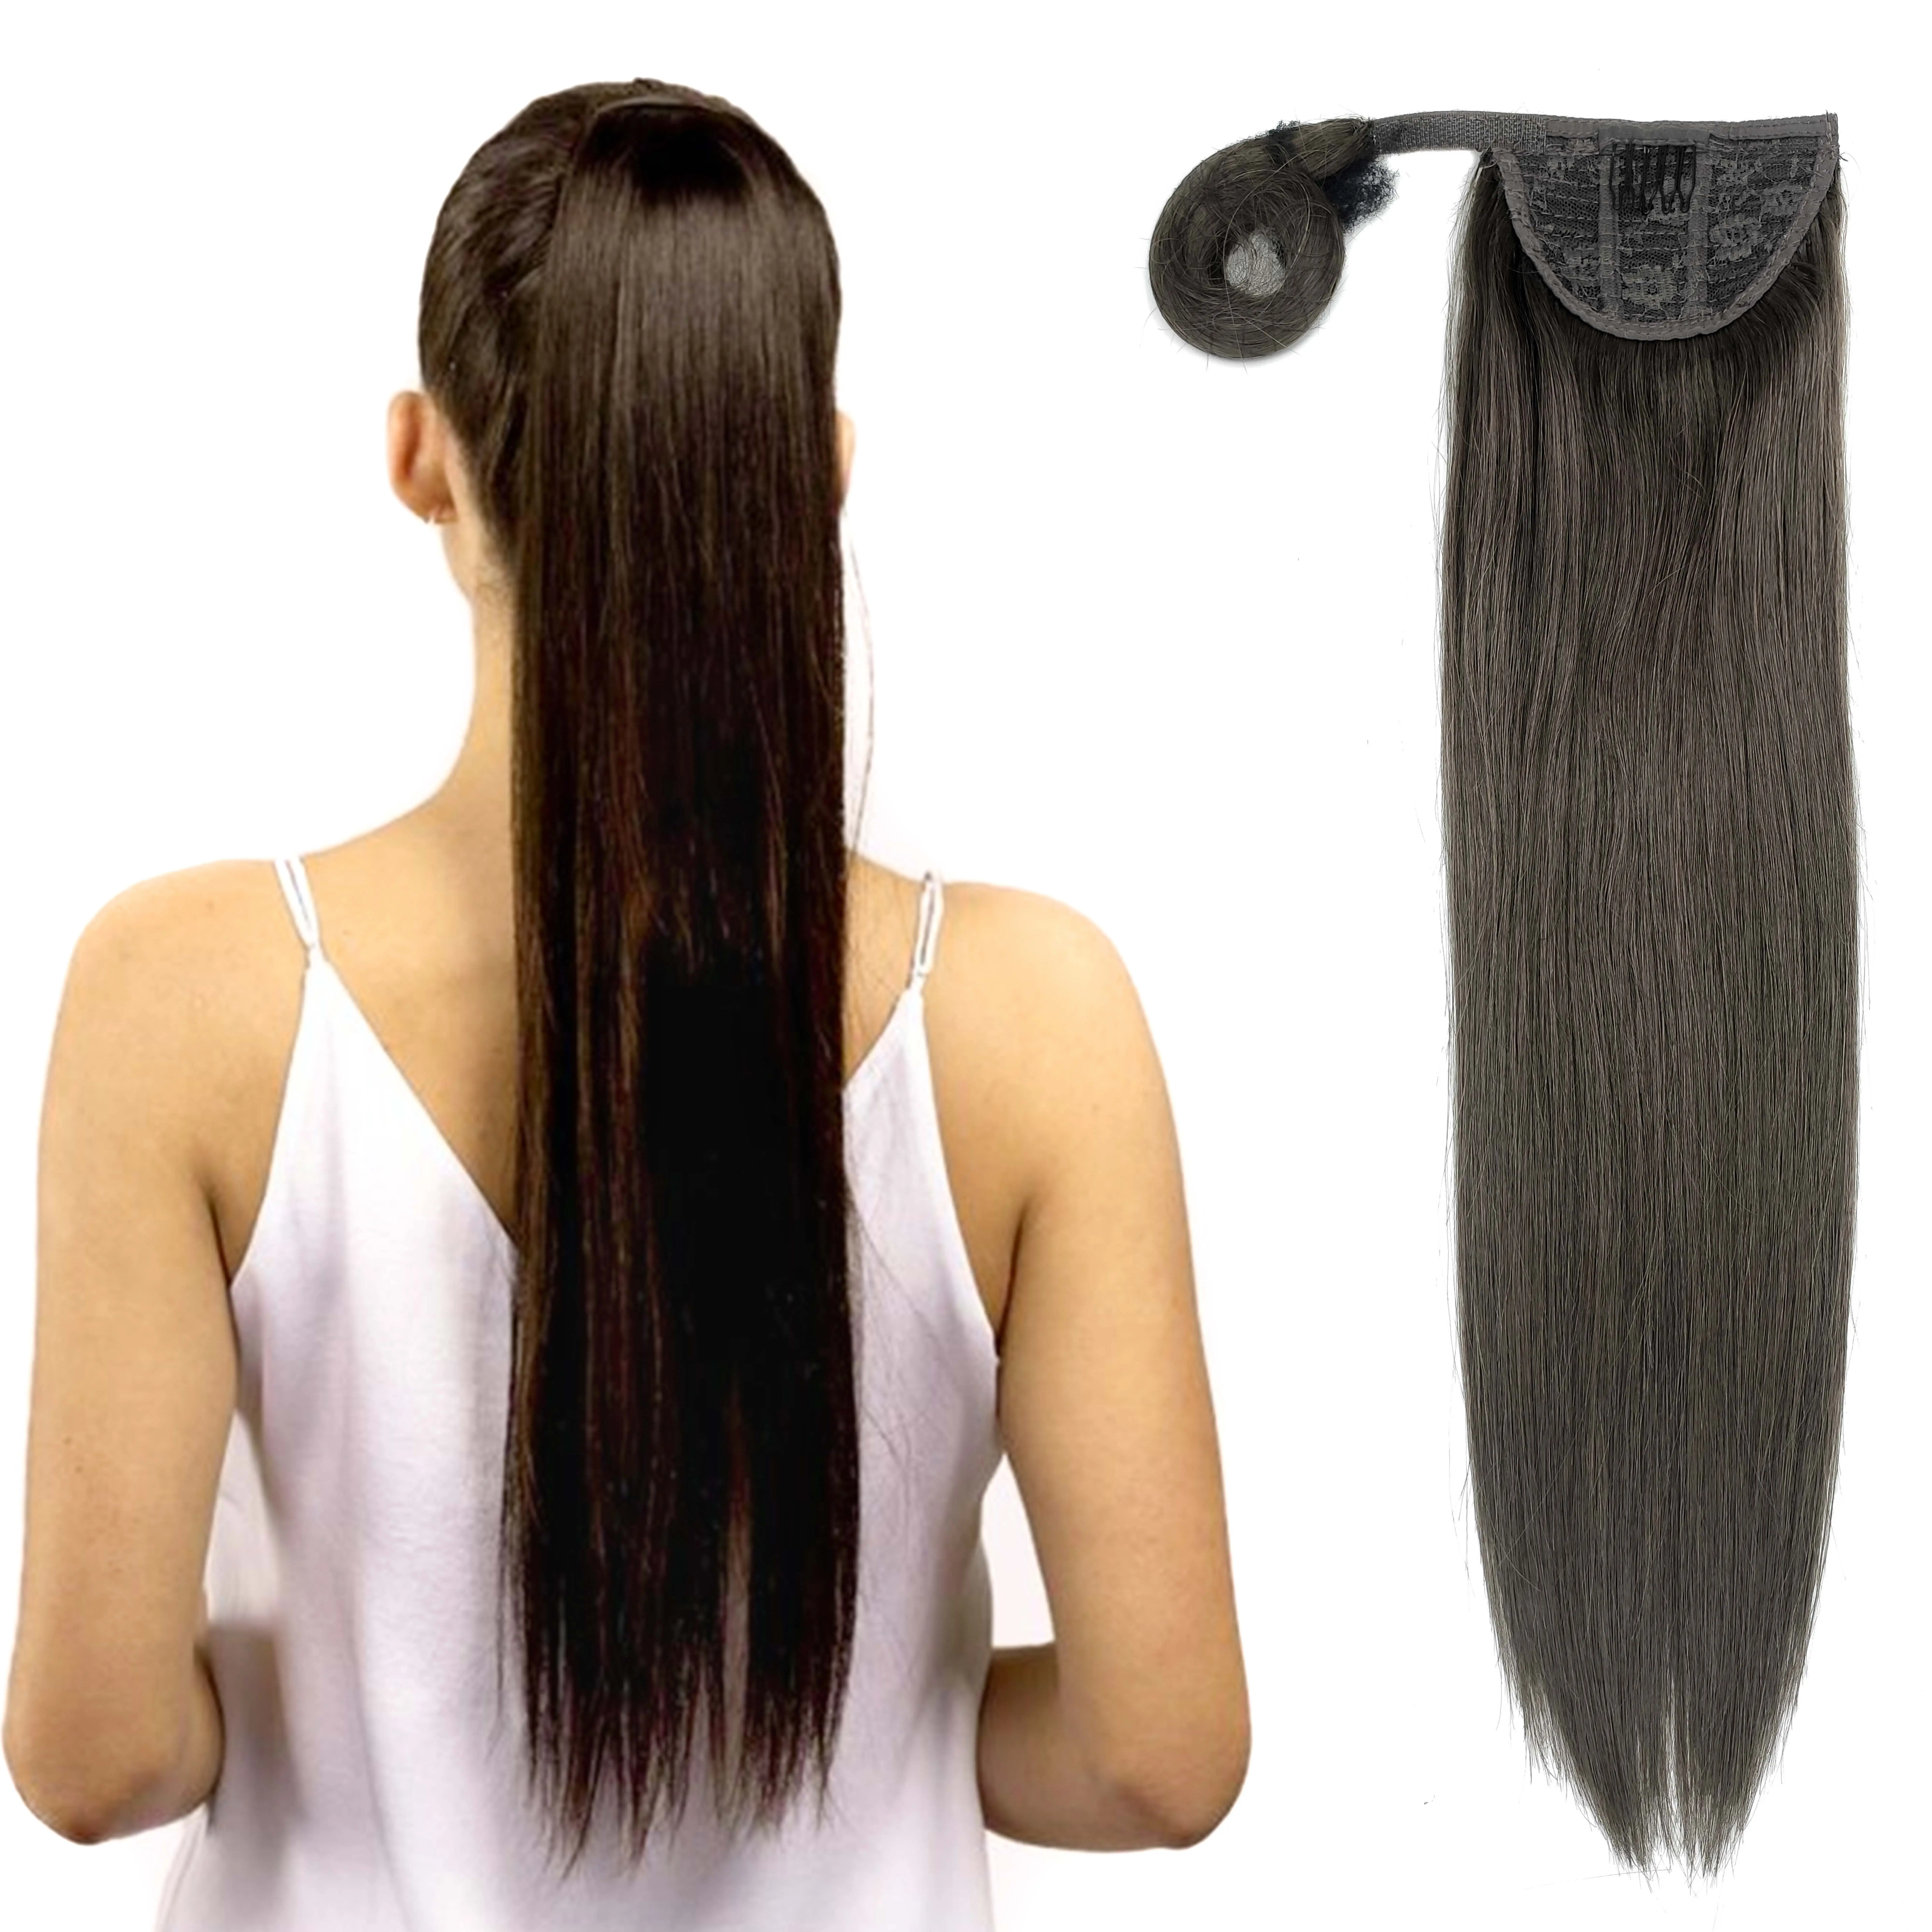 New Stylish Premium Ponytail Clip on Hair Extensions Luxury Ponytail Extension Human Hair